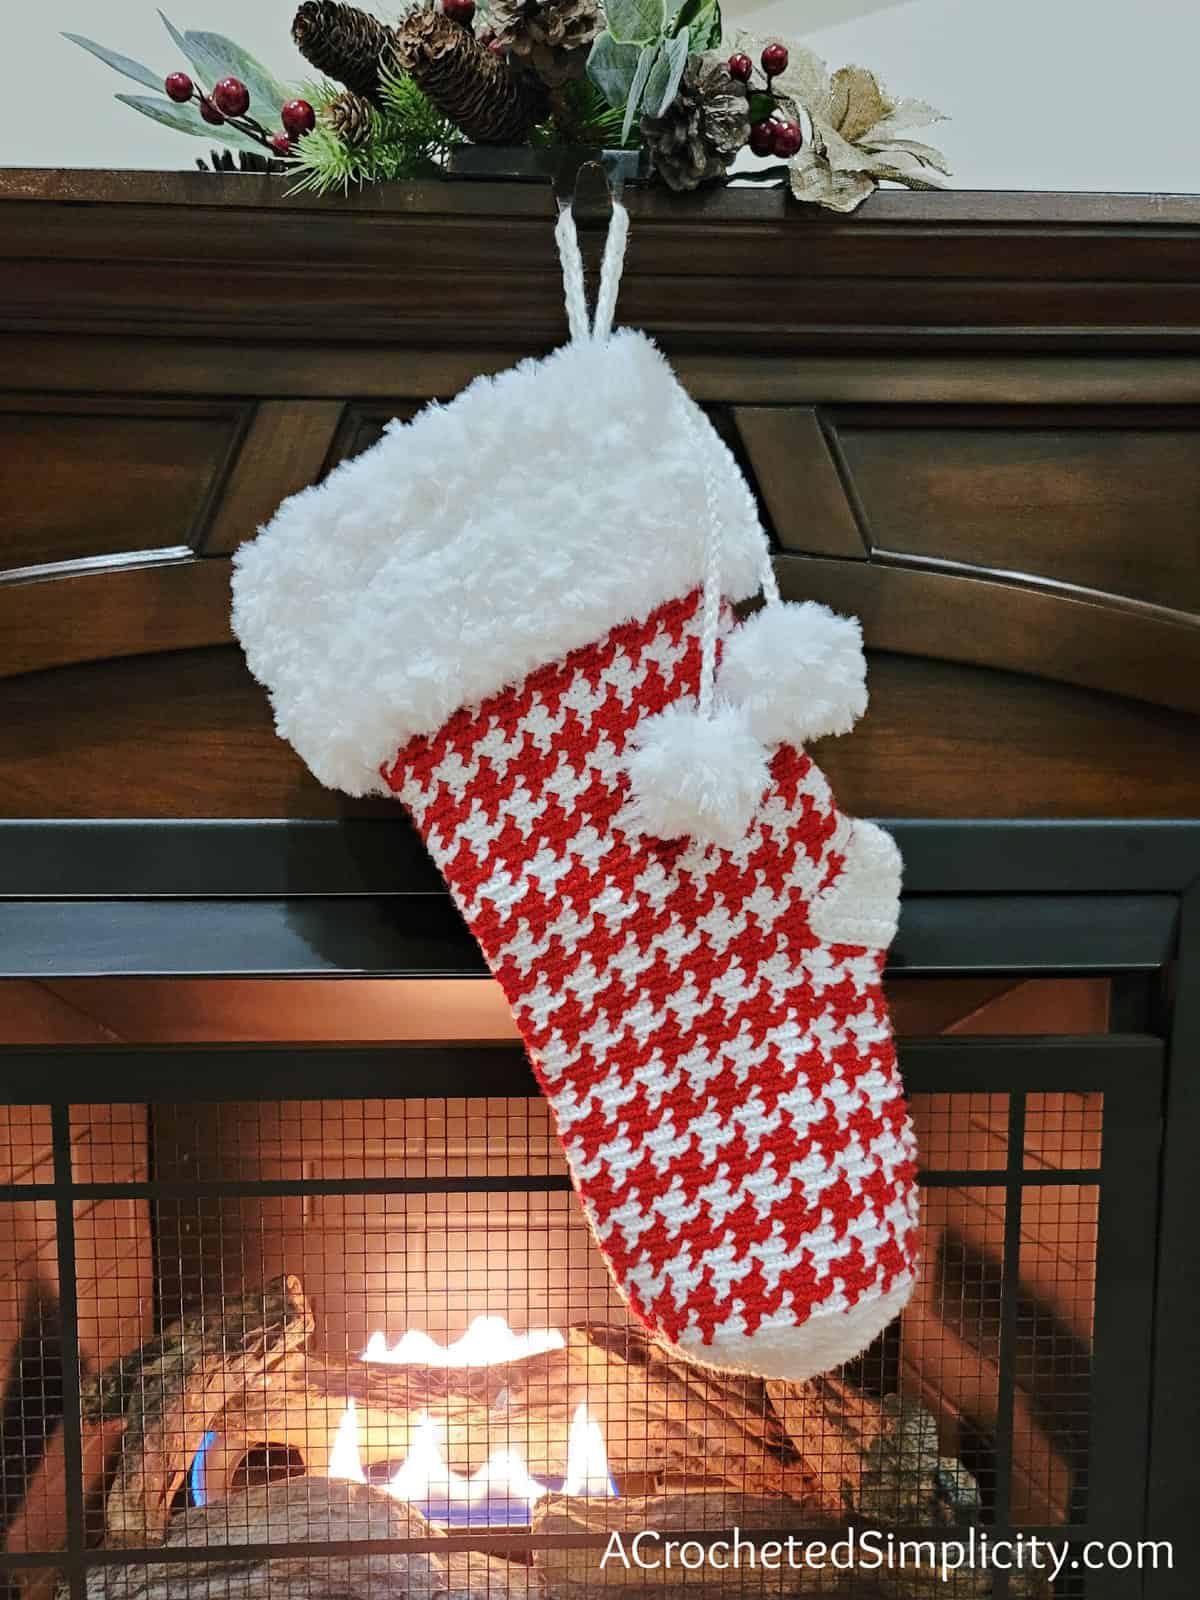 Free Crochet Stocking Pattern - Houndstooth Christmas Stocking by A Crocheted Simplicity #crochetcatherineswheel #crochetstocking #plaidstocking #farmhouseplaid #farmhousecrochet #crochetchristmas #crochetchristmasstocking #freecrochetpattern #crochet #handmadestocking #handmadechristmas #houndstooth #classichoundstooth #crochethoundstooth #houndstoothstocking